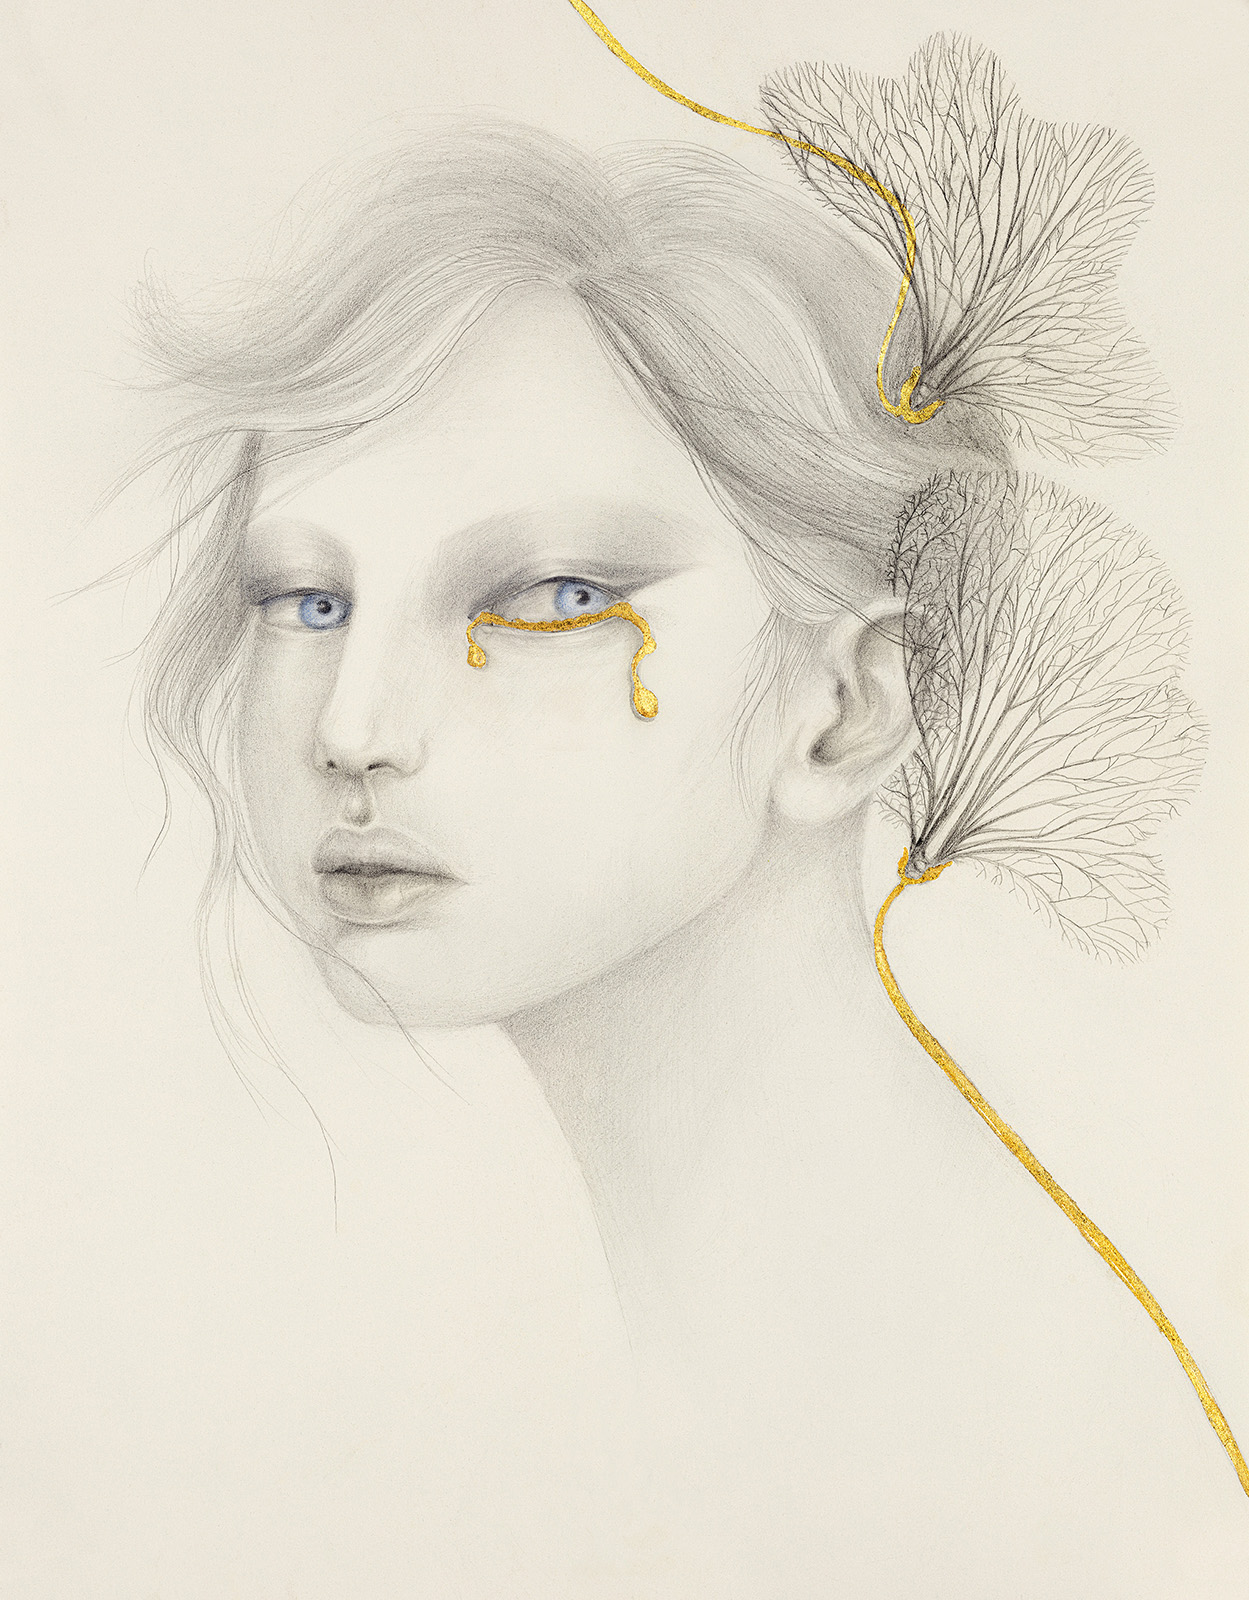 Graphite And Gold Drawings By Iskra Sale (2)